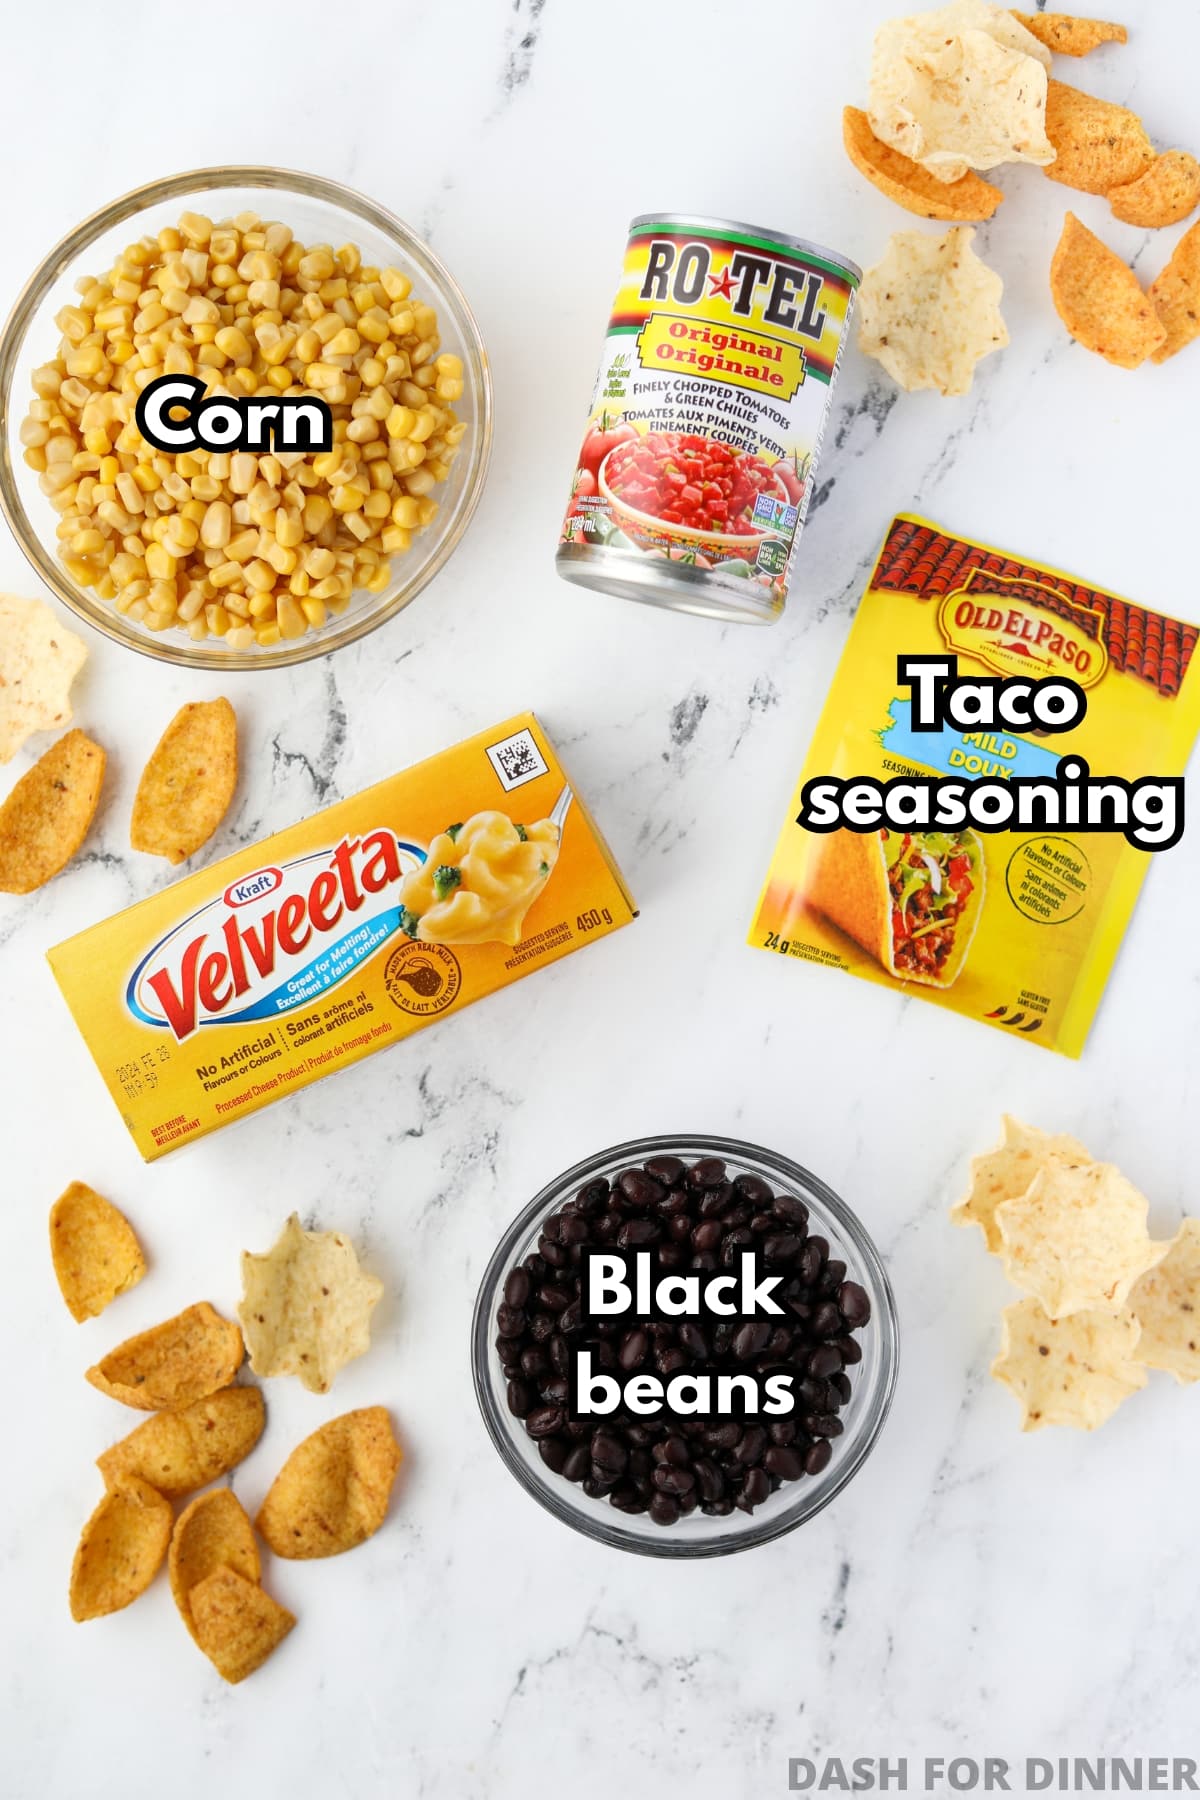 The ingredients needed to make Southwest dip: Velvet, beans, corn, taco seasoning, and Rotel.